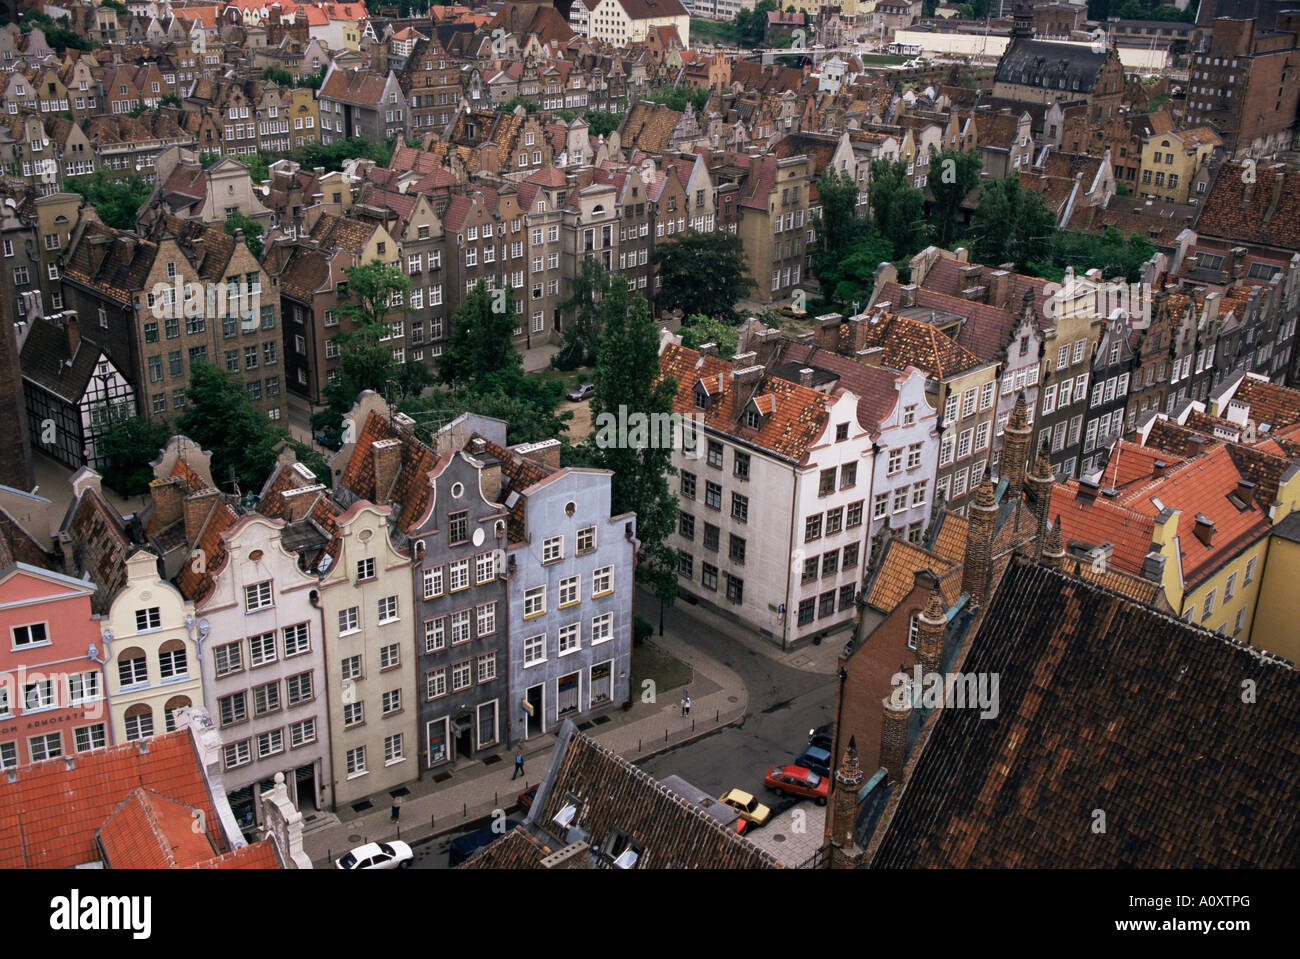 Gables and painted facades of Hanseatic Gdansk Gdansk Pomerania Poland Europe Stock Photo